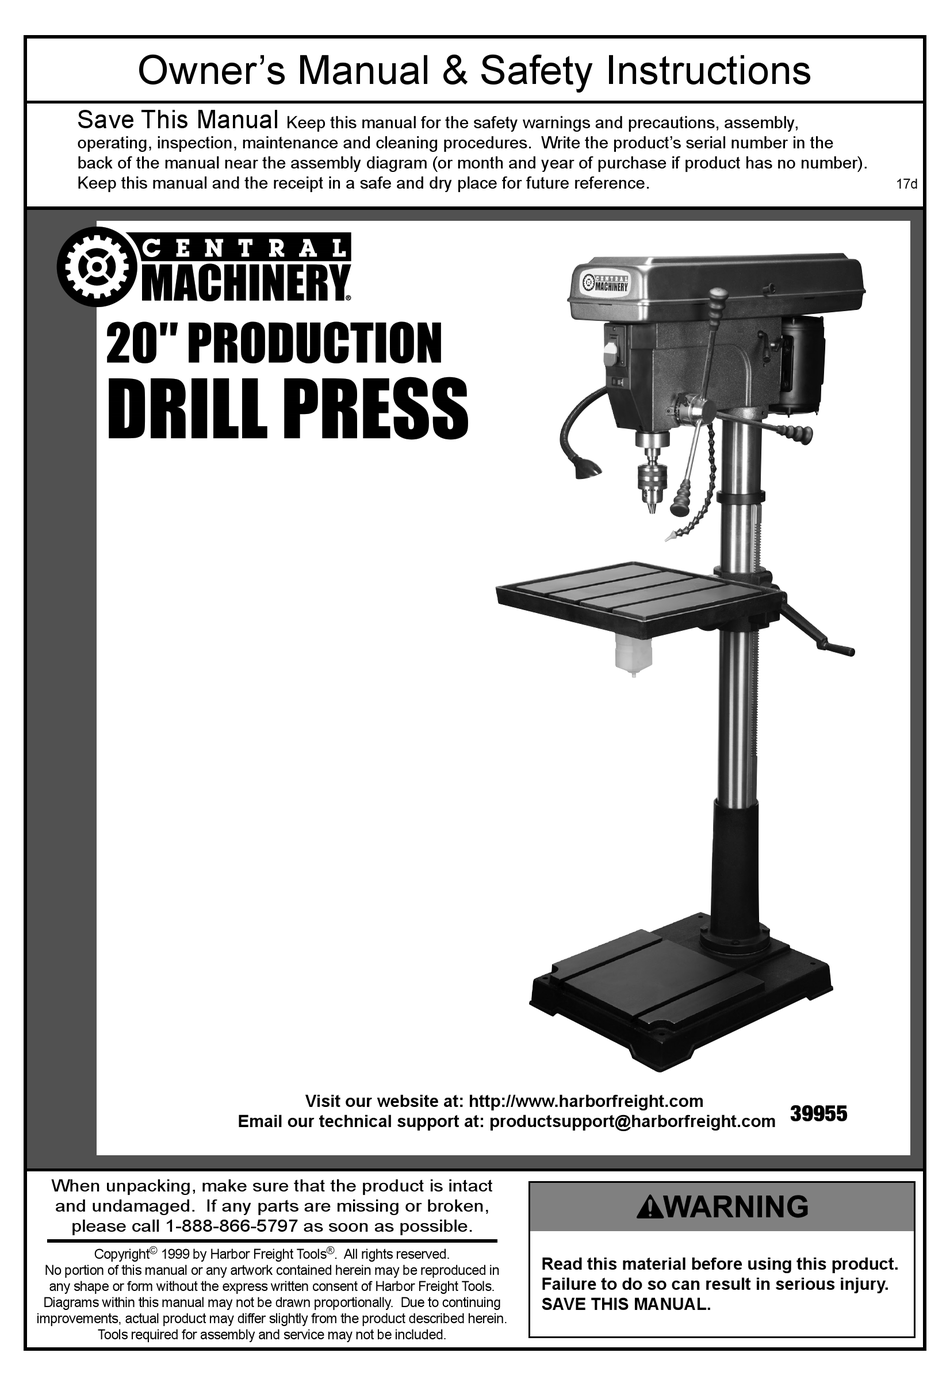 CENTRAL MACHINERY 39955 OWNER'S MANUAL & SAFETY INSTRUCTIONS Pdf